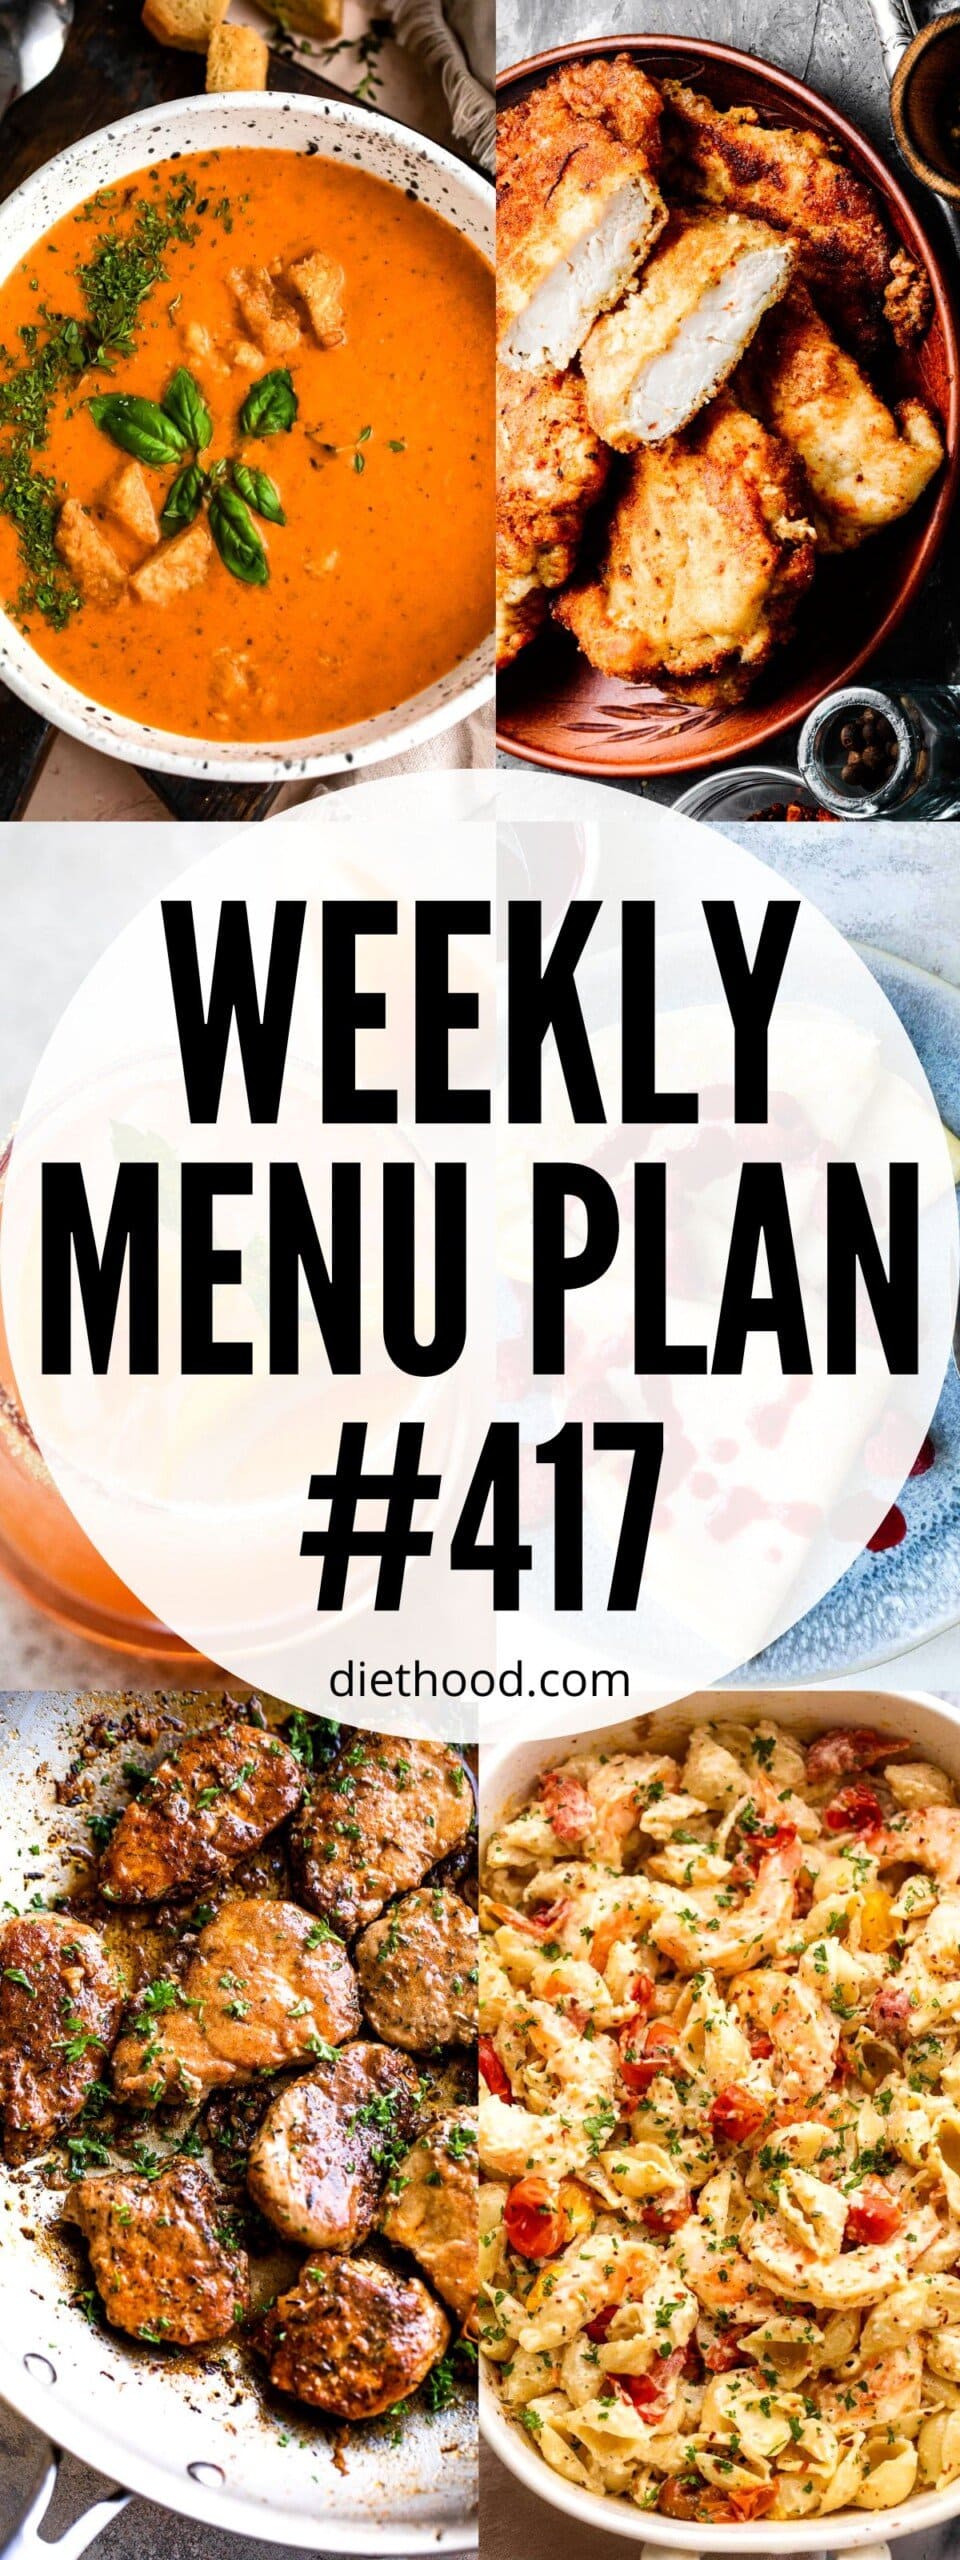 WEEKLY MENU PLAN 417 six pictures collage